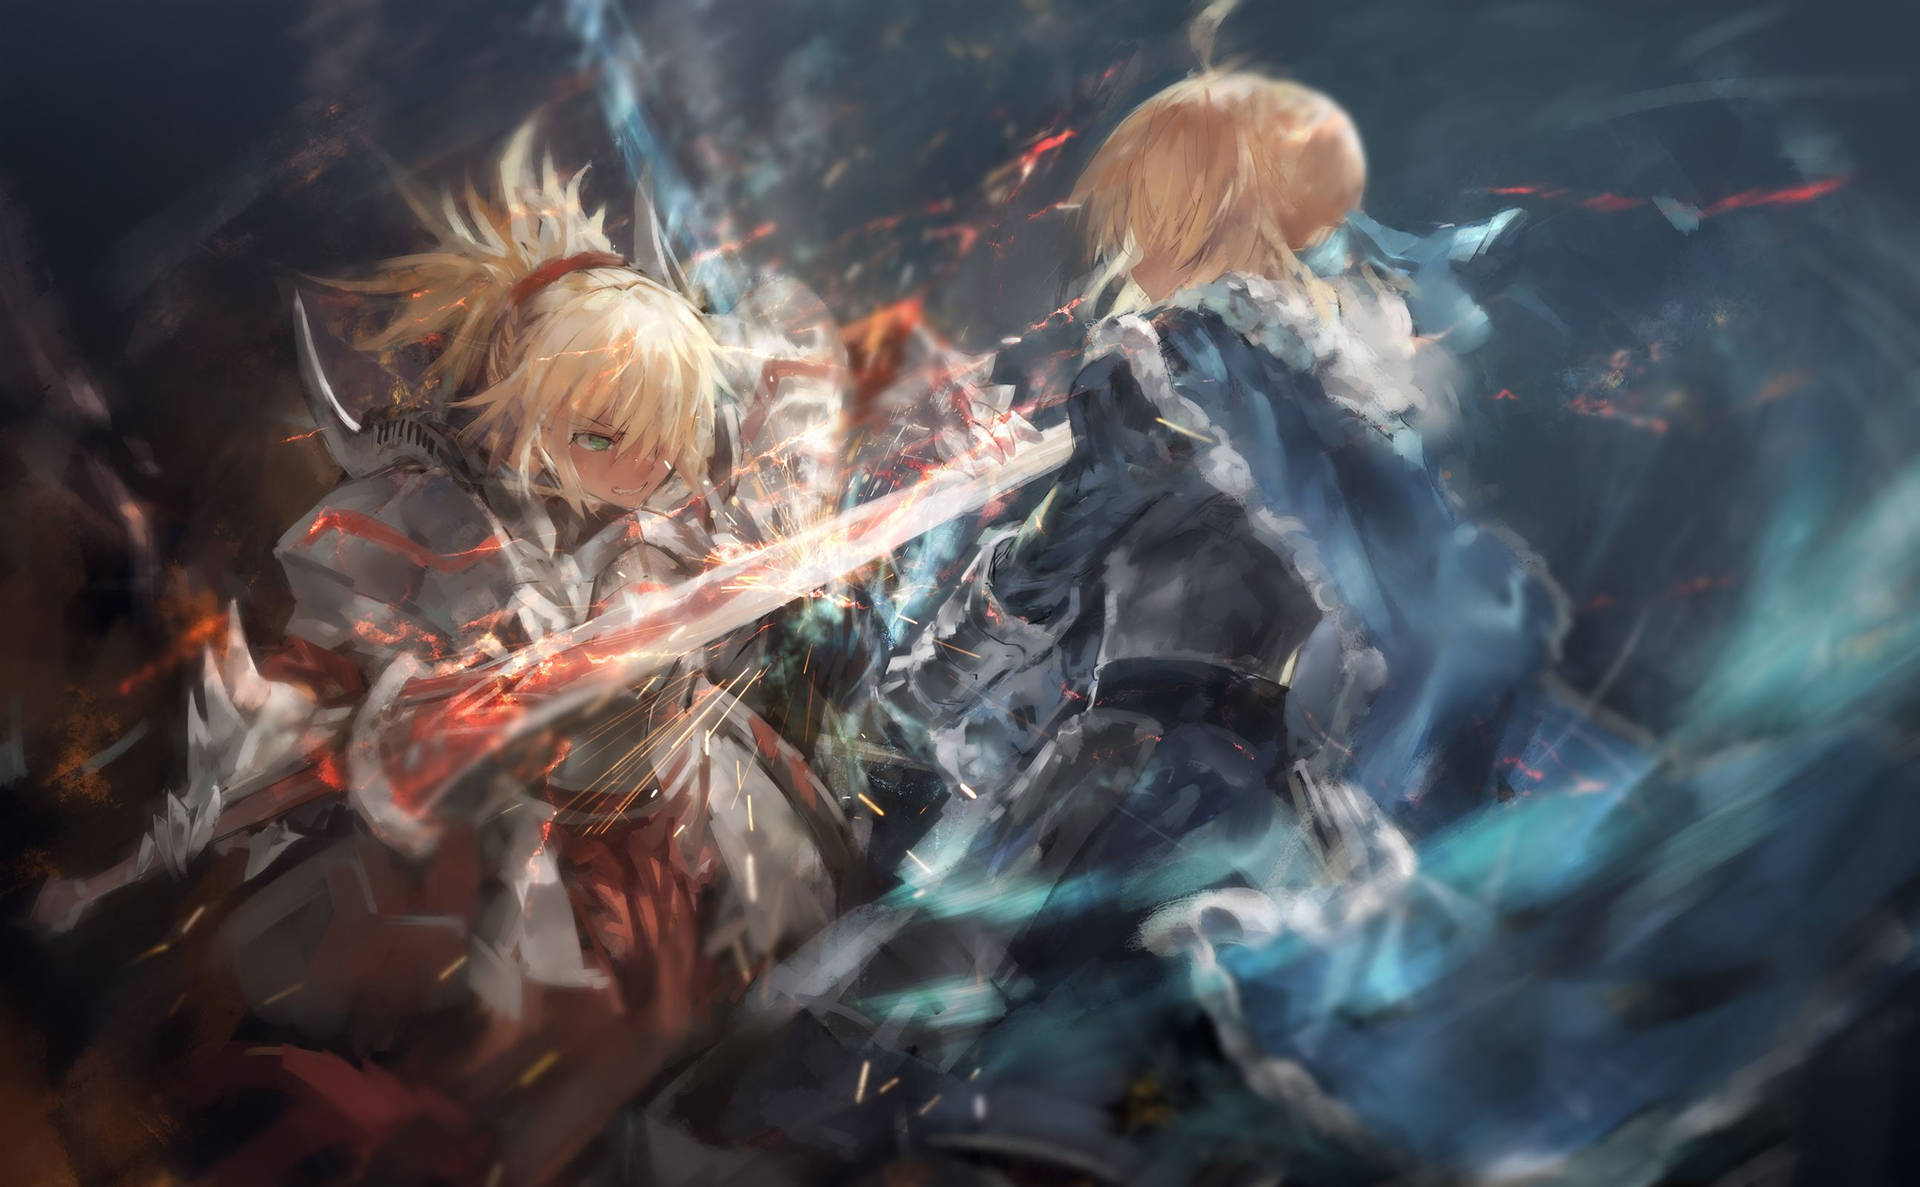 Saber Fighting In Fate / Apocrypha